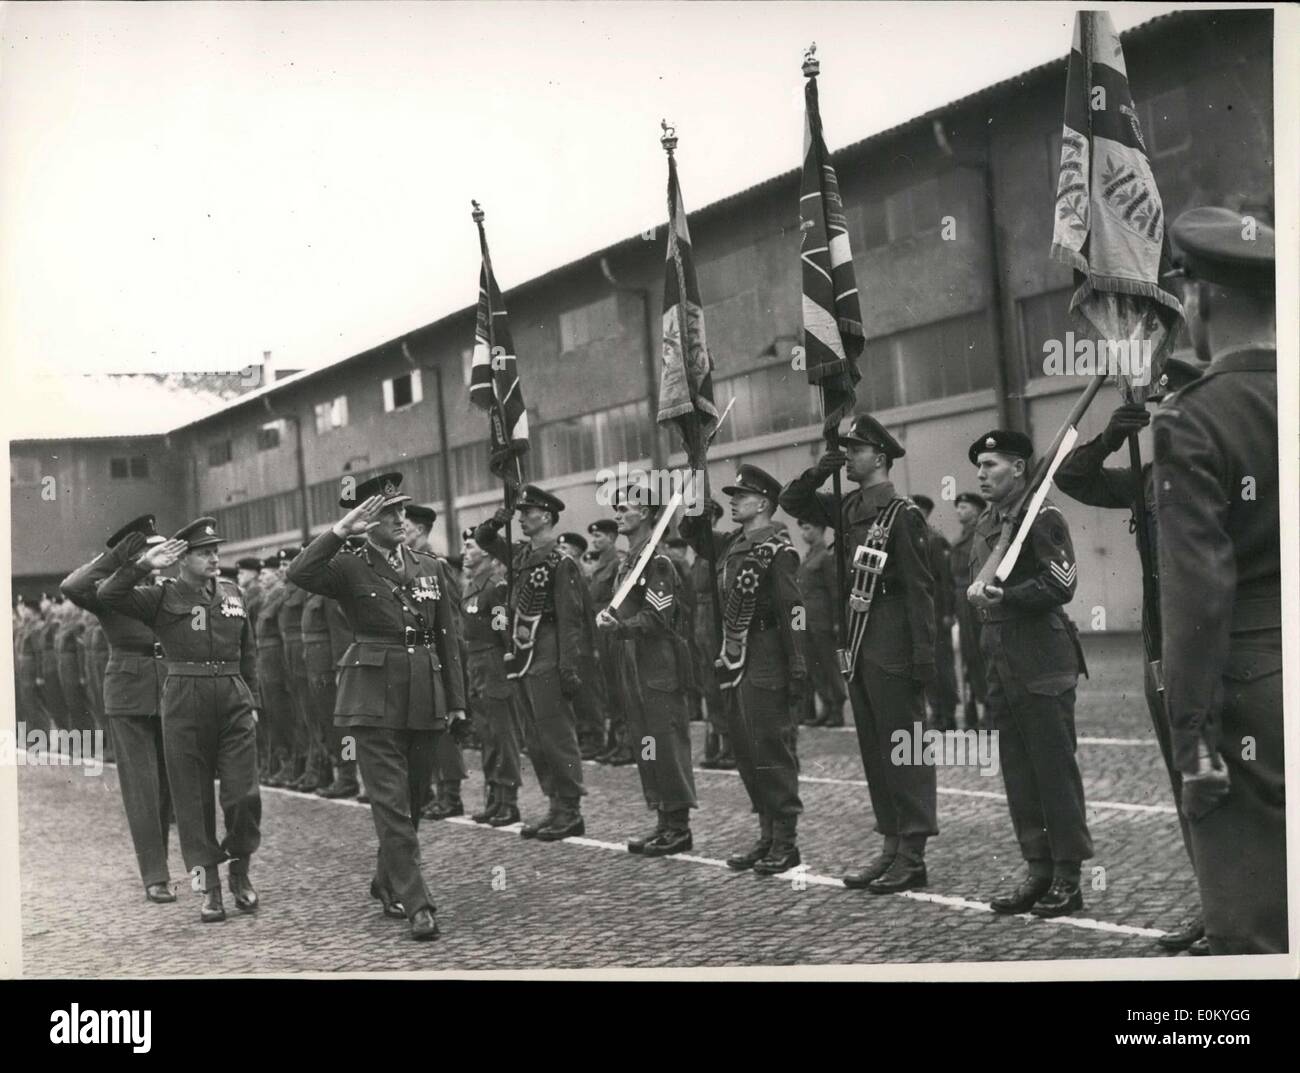 Nov. 26, 1952 - The Yorkshire regiment, seen here, left Berlin for Malaysia in order to fight insurgents in the forests. Pictured is their last review before they left. Commanding Officer General Major Coleman greets the regiment. Stock Photo